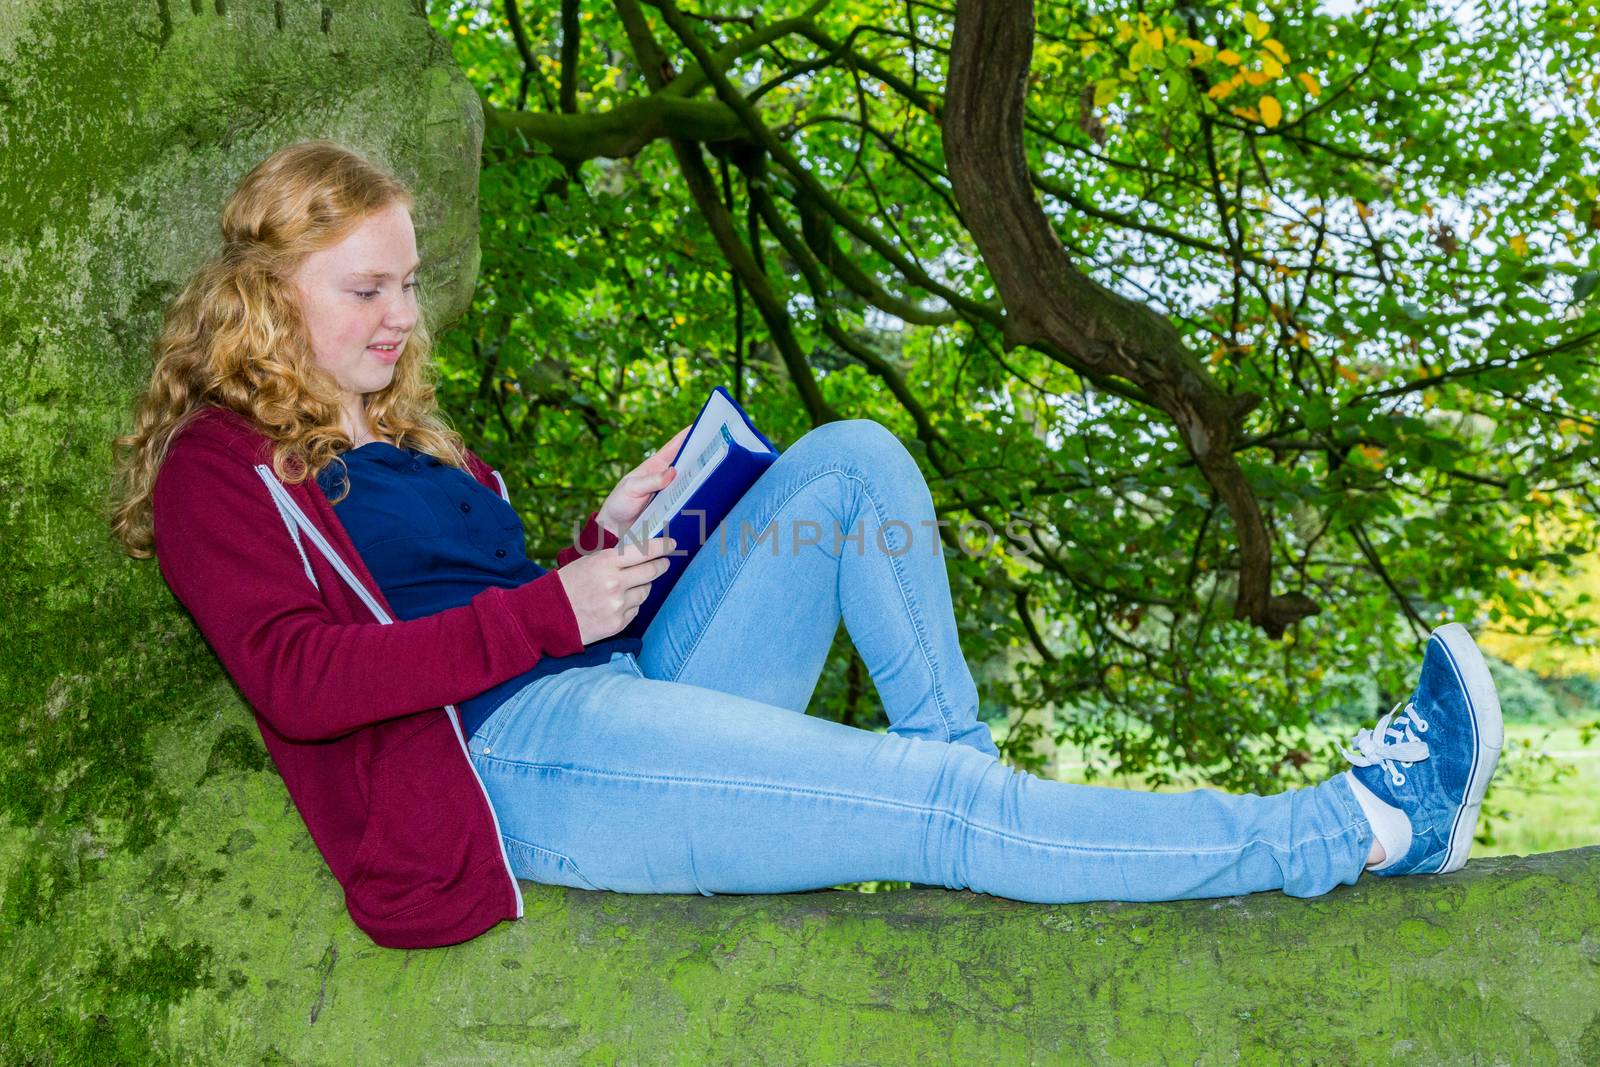 Dutch girl lying reading book in green tree by BenSchonewille